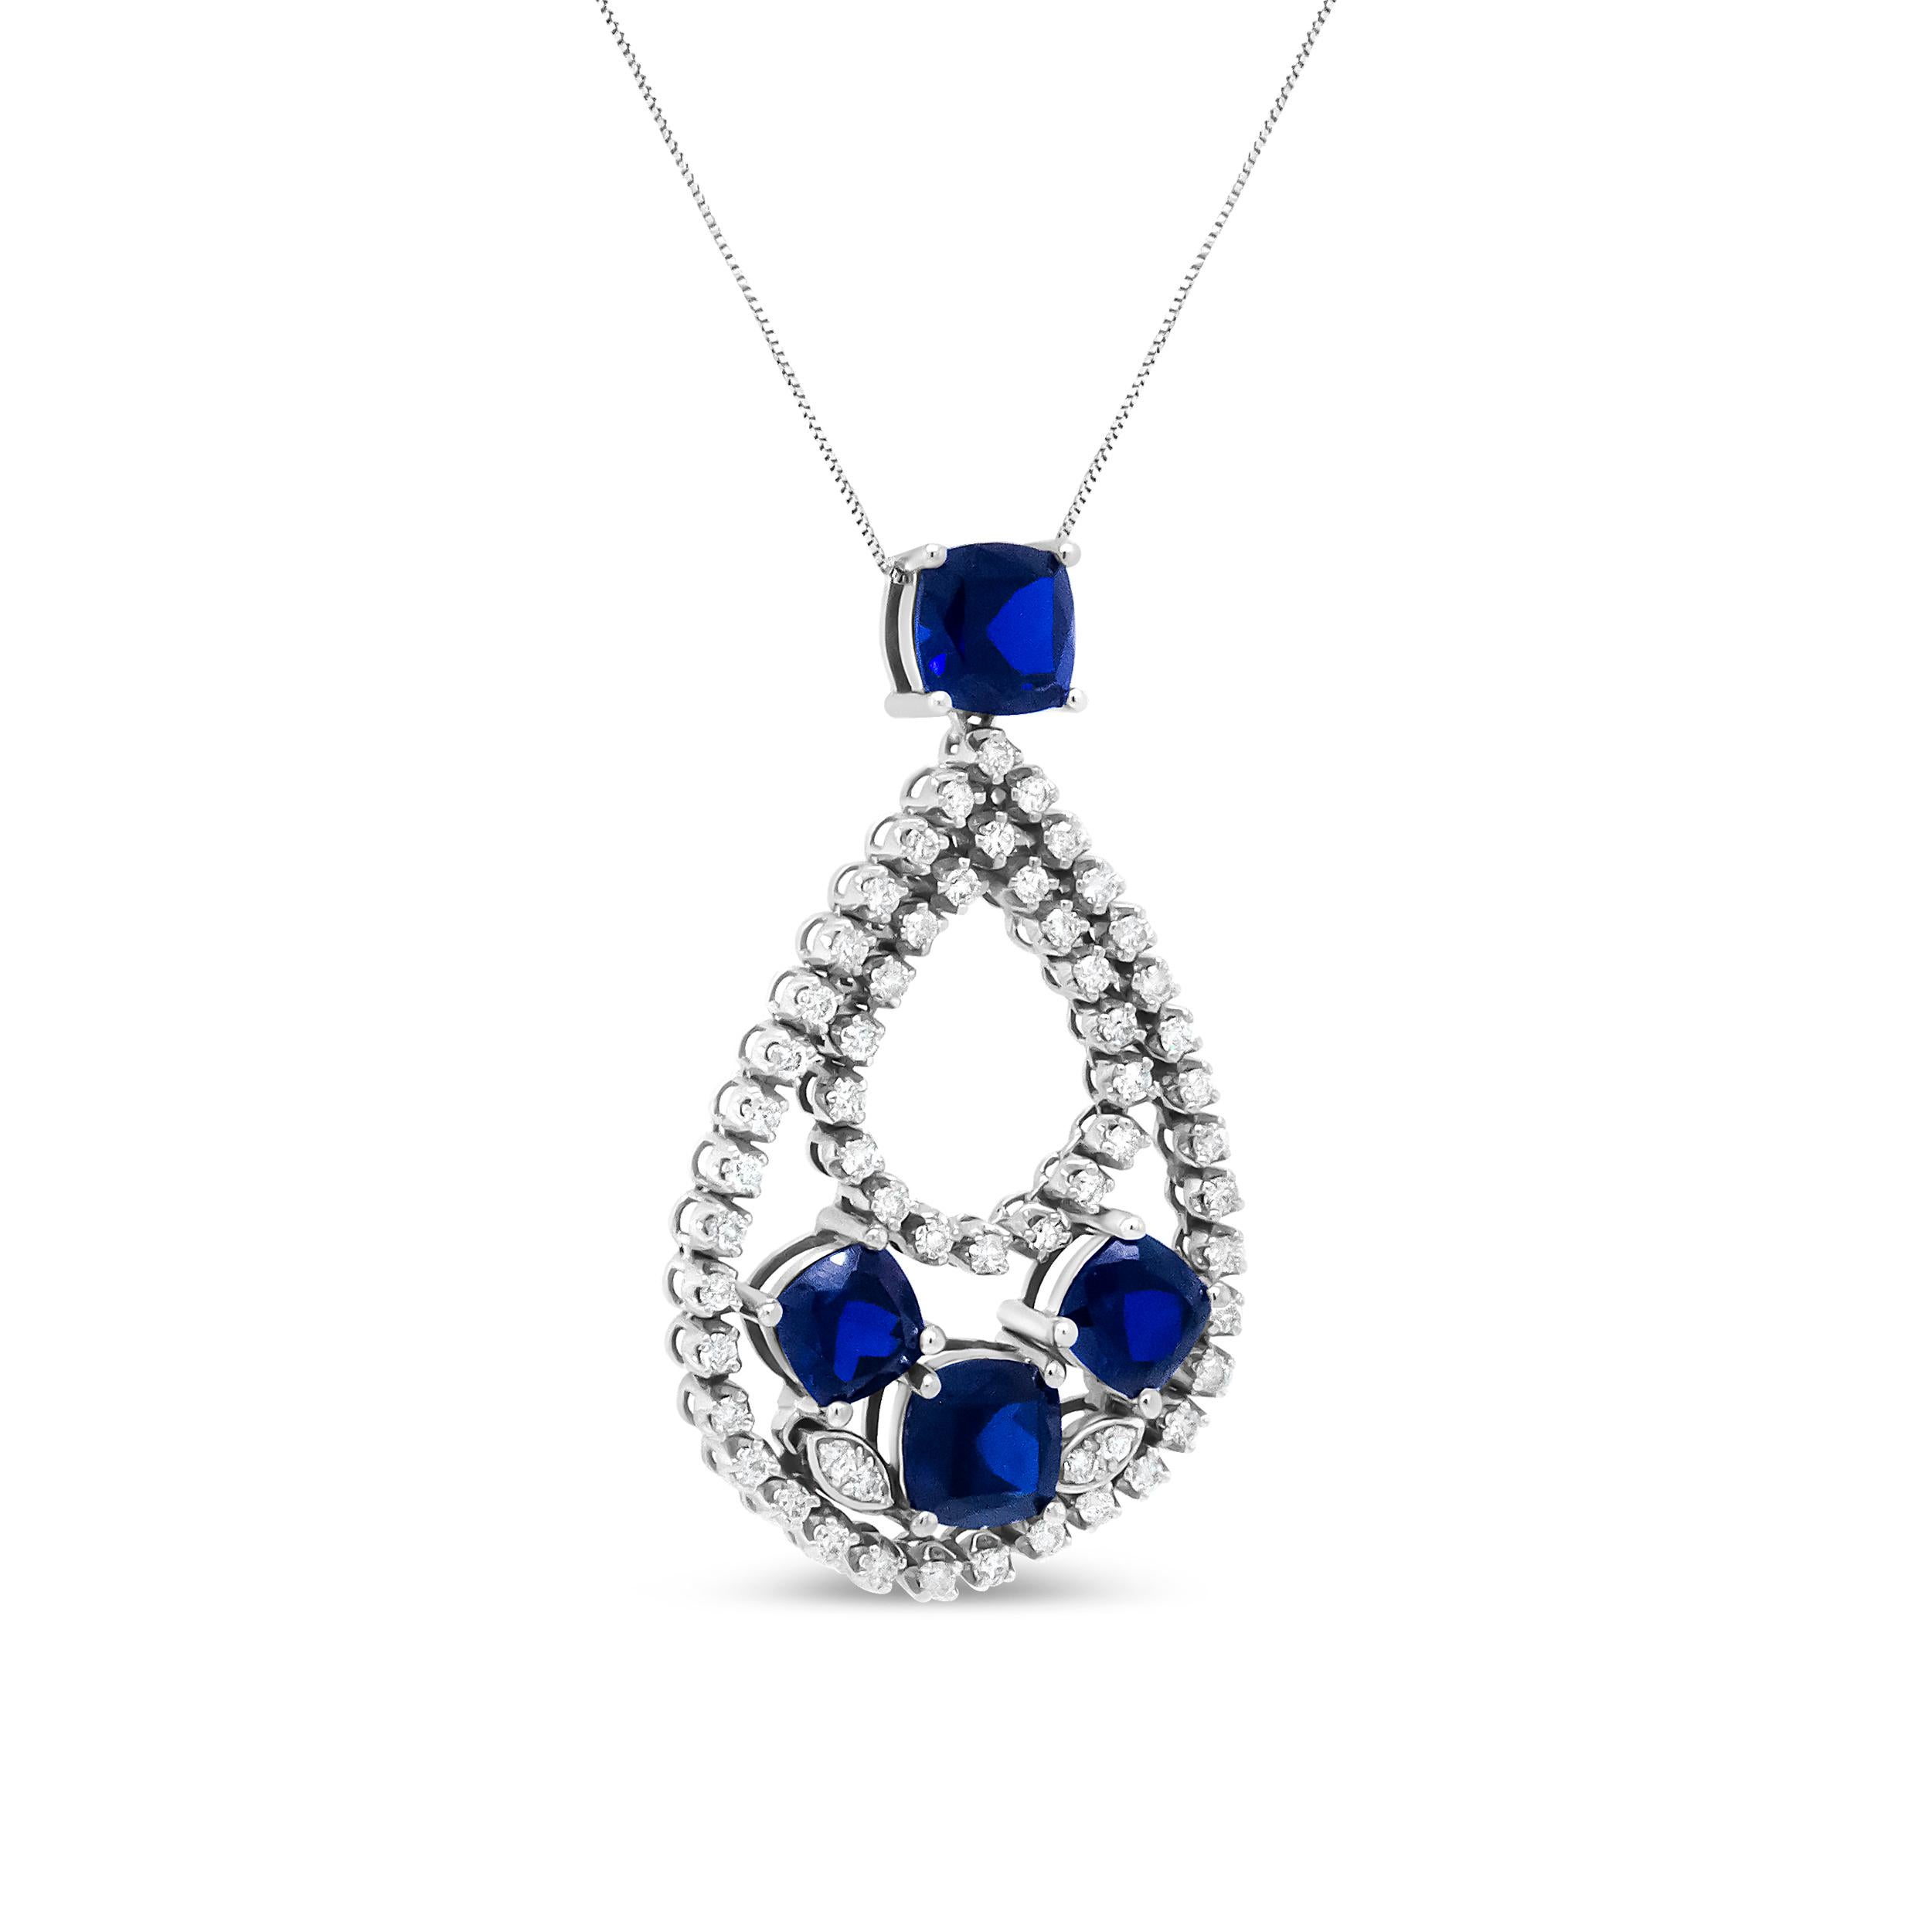 An sophisticated addition to your outfit, this 18k white gold pendant necklace adds a hearty dose of sparkle at every turn. The design starts with a bail embellished with a cushion-shaped sapphire in a color-treated blue color. An double openwork